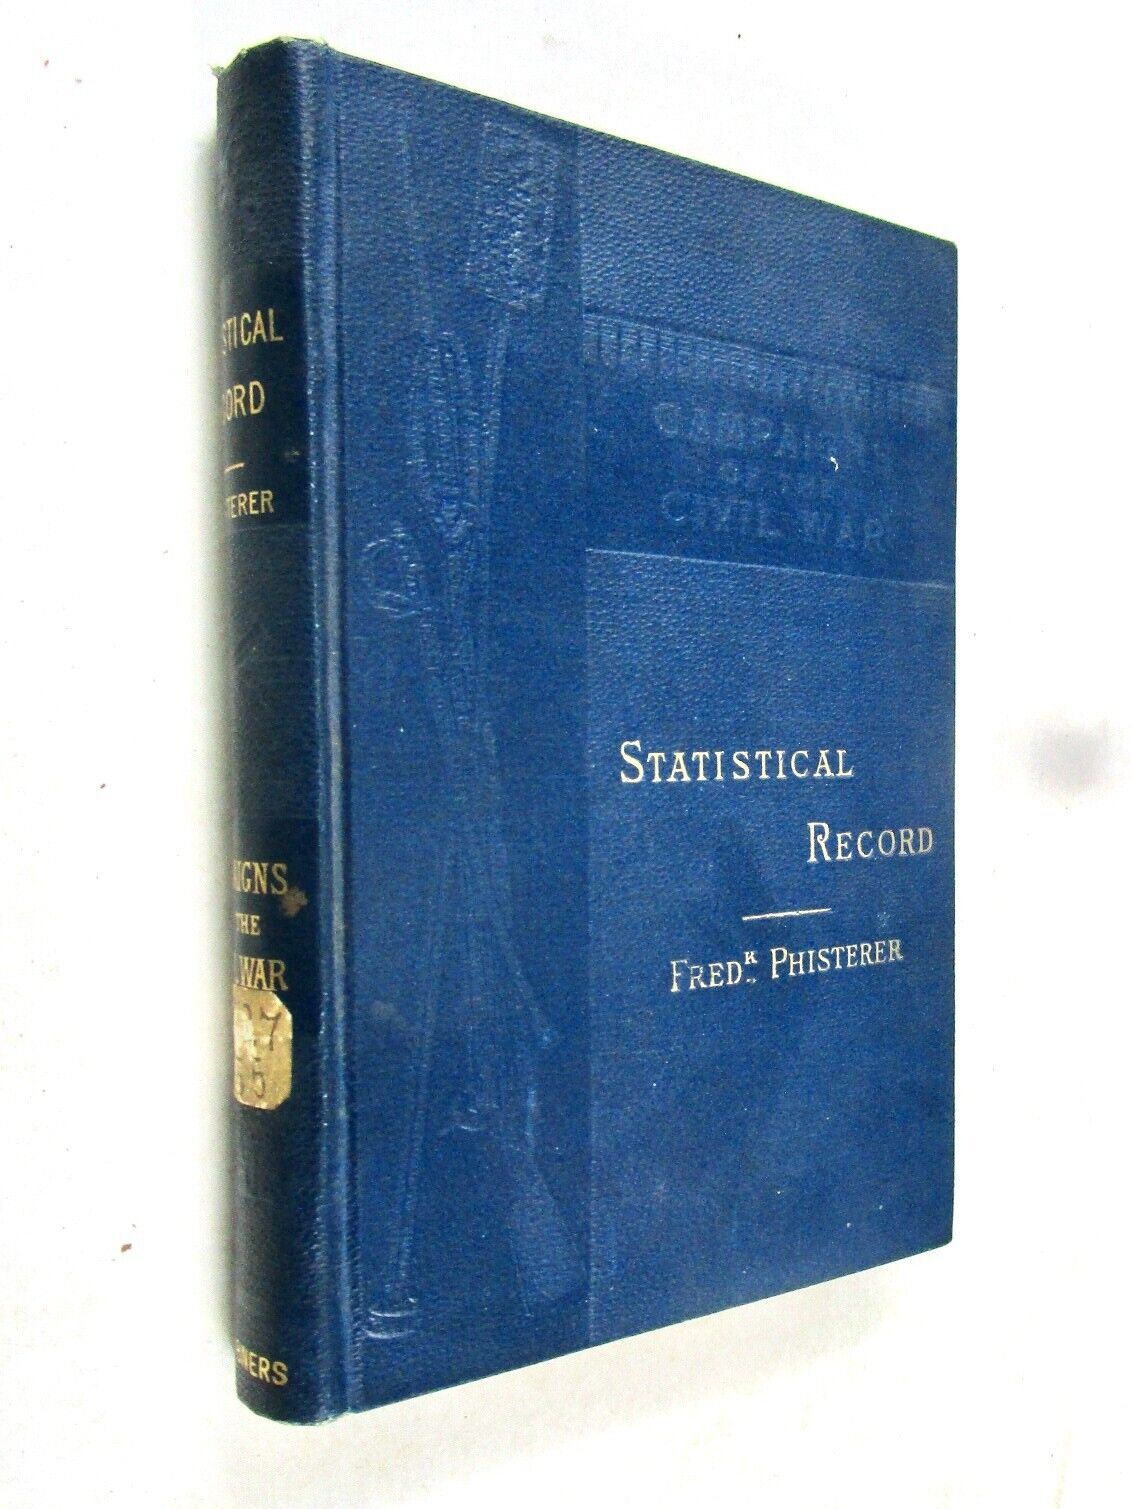 1887 Civil War Statistical Records of U. S. Army, Battles, Officers, Casualties